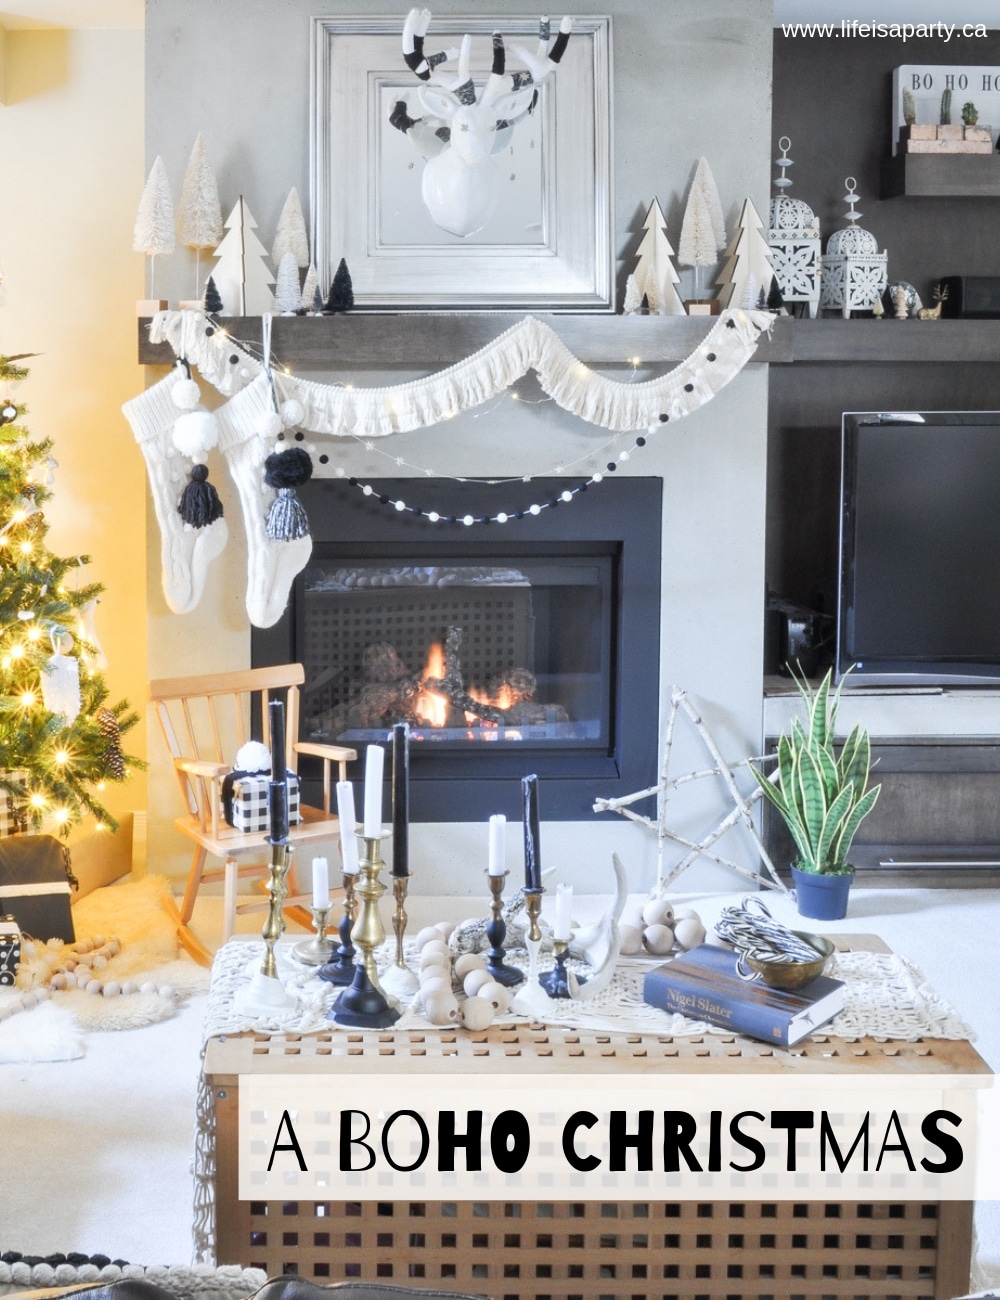 Boho Christmas Decor: decorated for Christmas with black and whtie boho including lots of texture, tassels, pom poms, brass, wood, and twinkle lights.